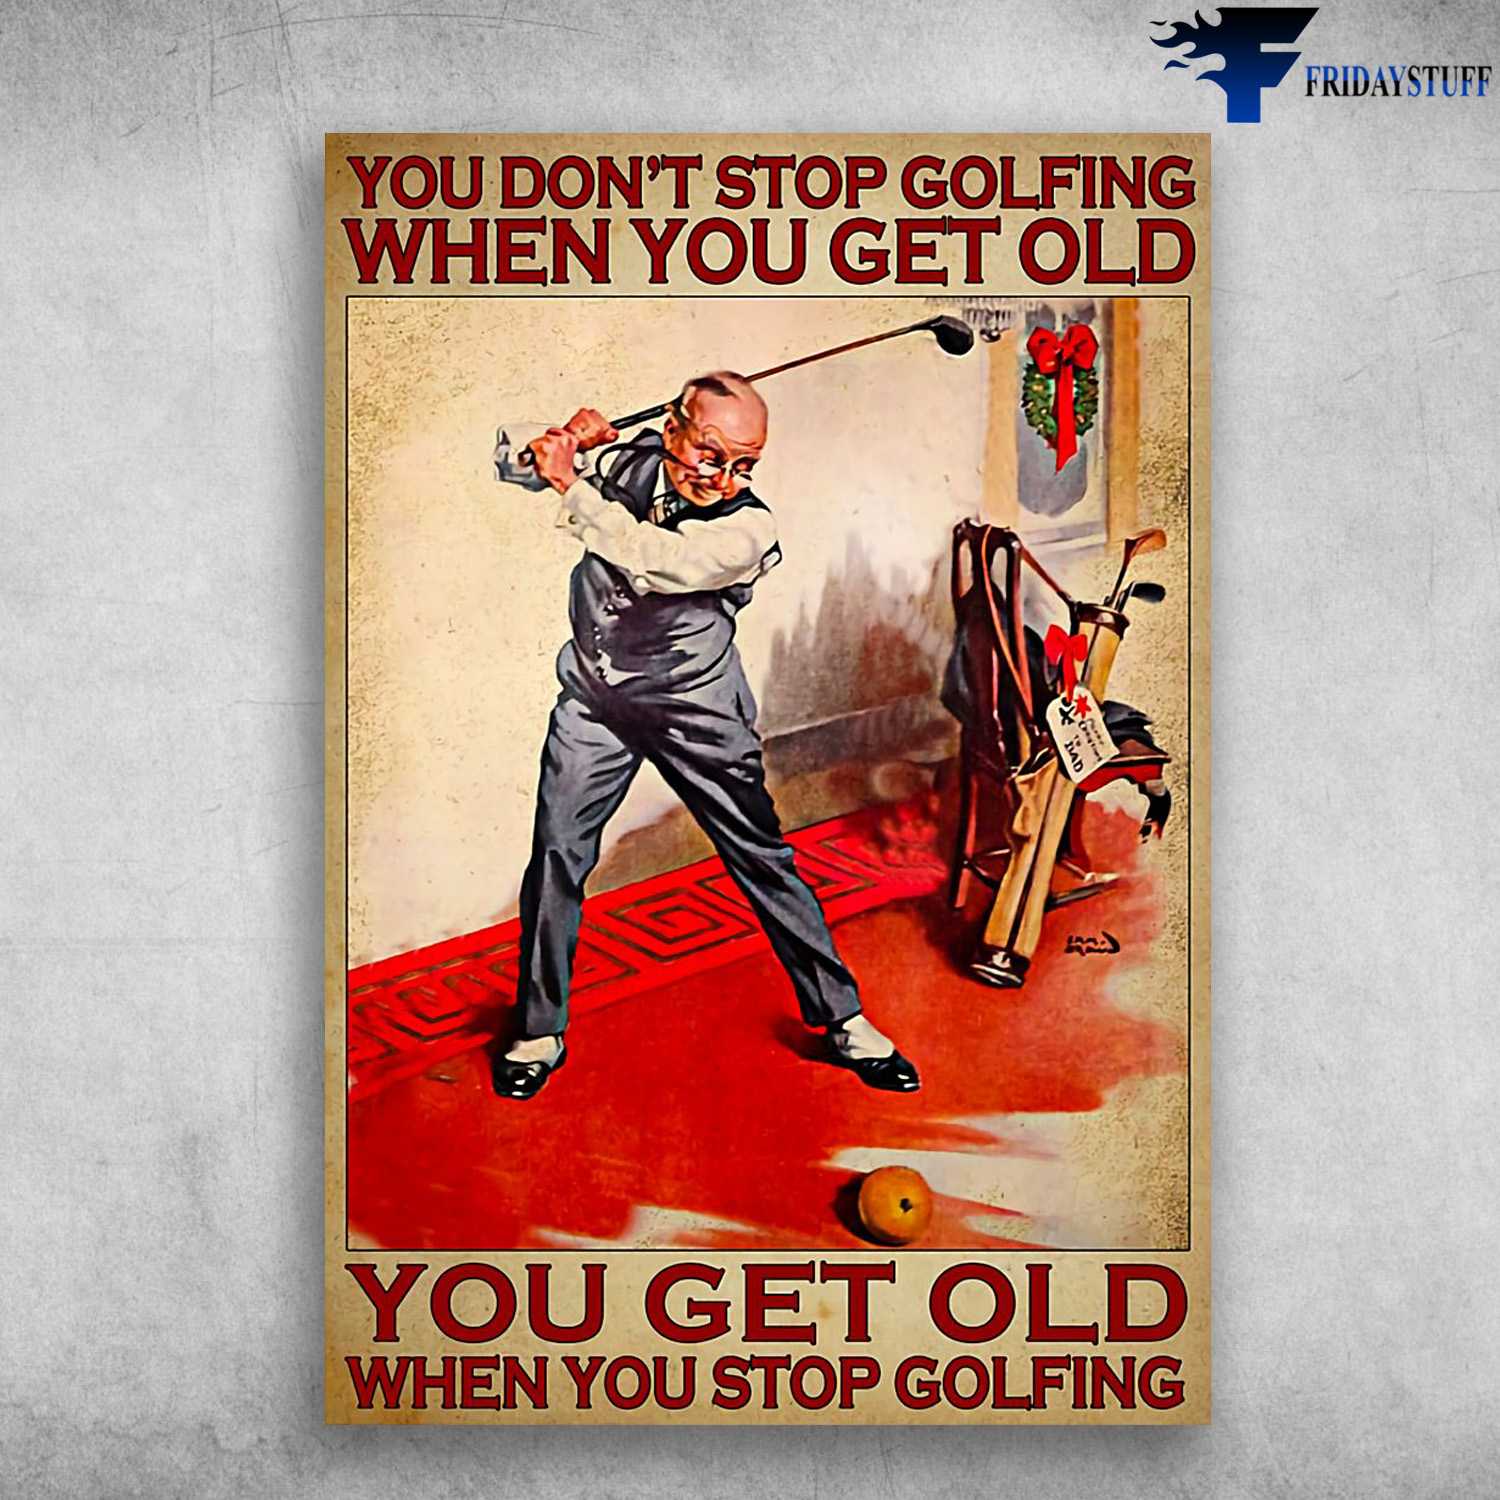 Golf Lover, Old Man Plays Golf, You Don't Stop Golfing When You Get Old, You Get Old When You Stop Golfing